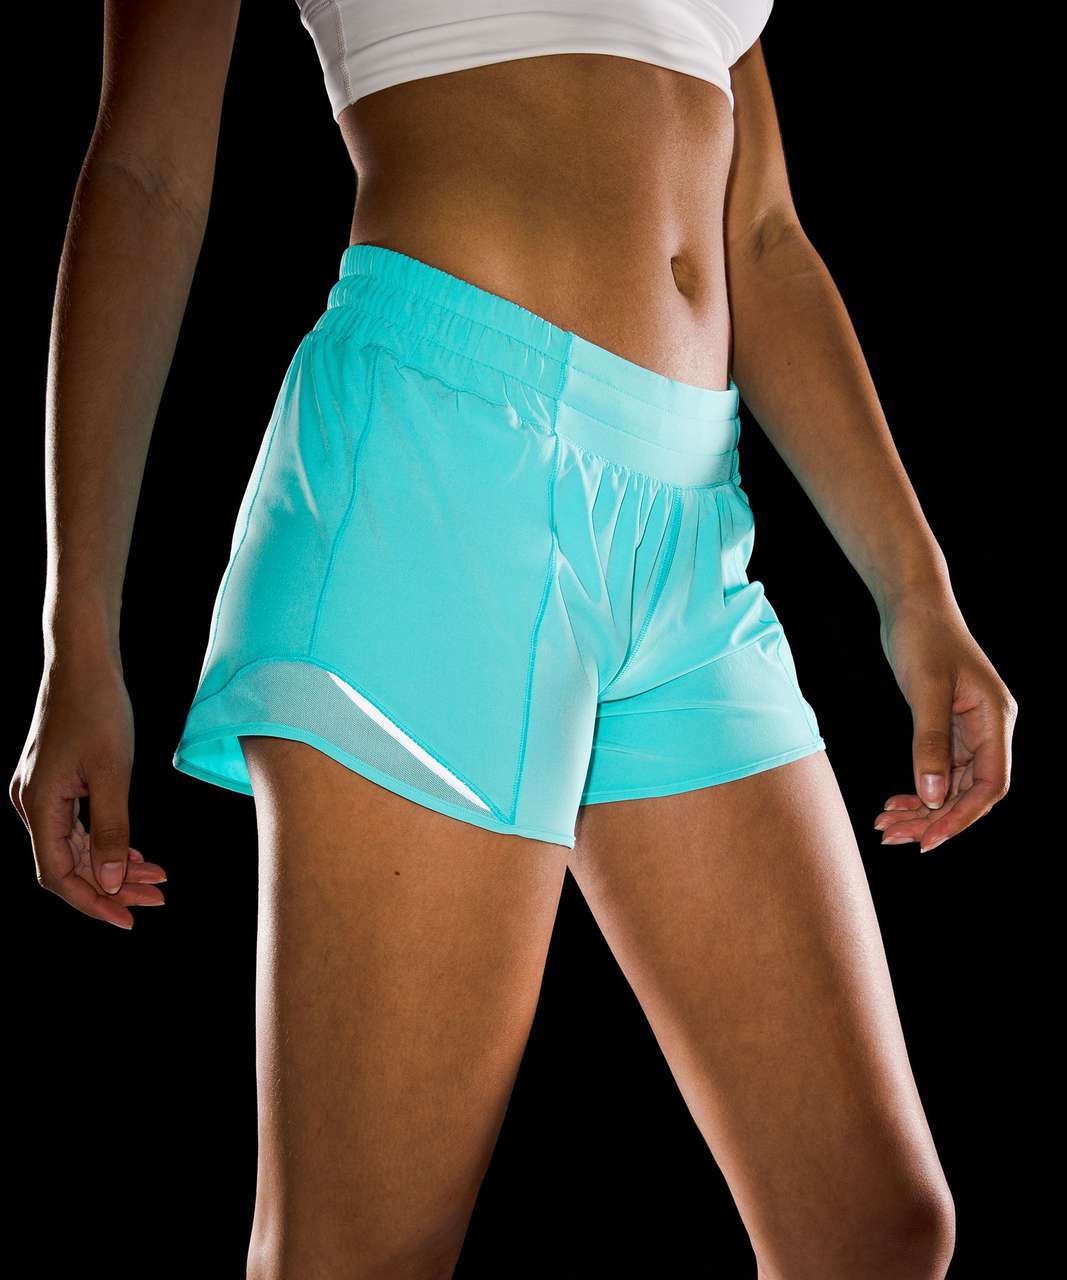 Lululemon Hotty Hot Low-Rise Lined Short 4" - Electric Turquoise